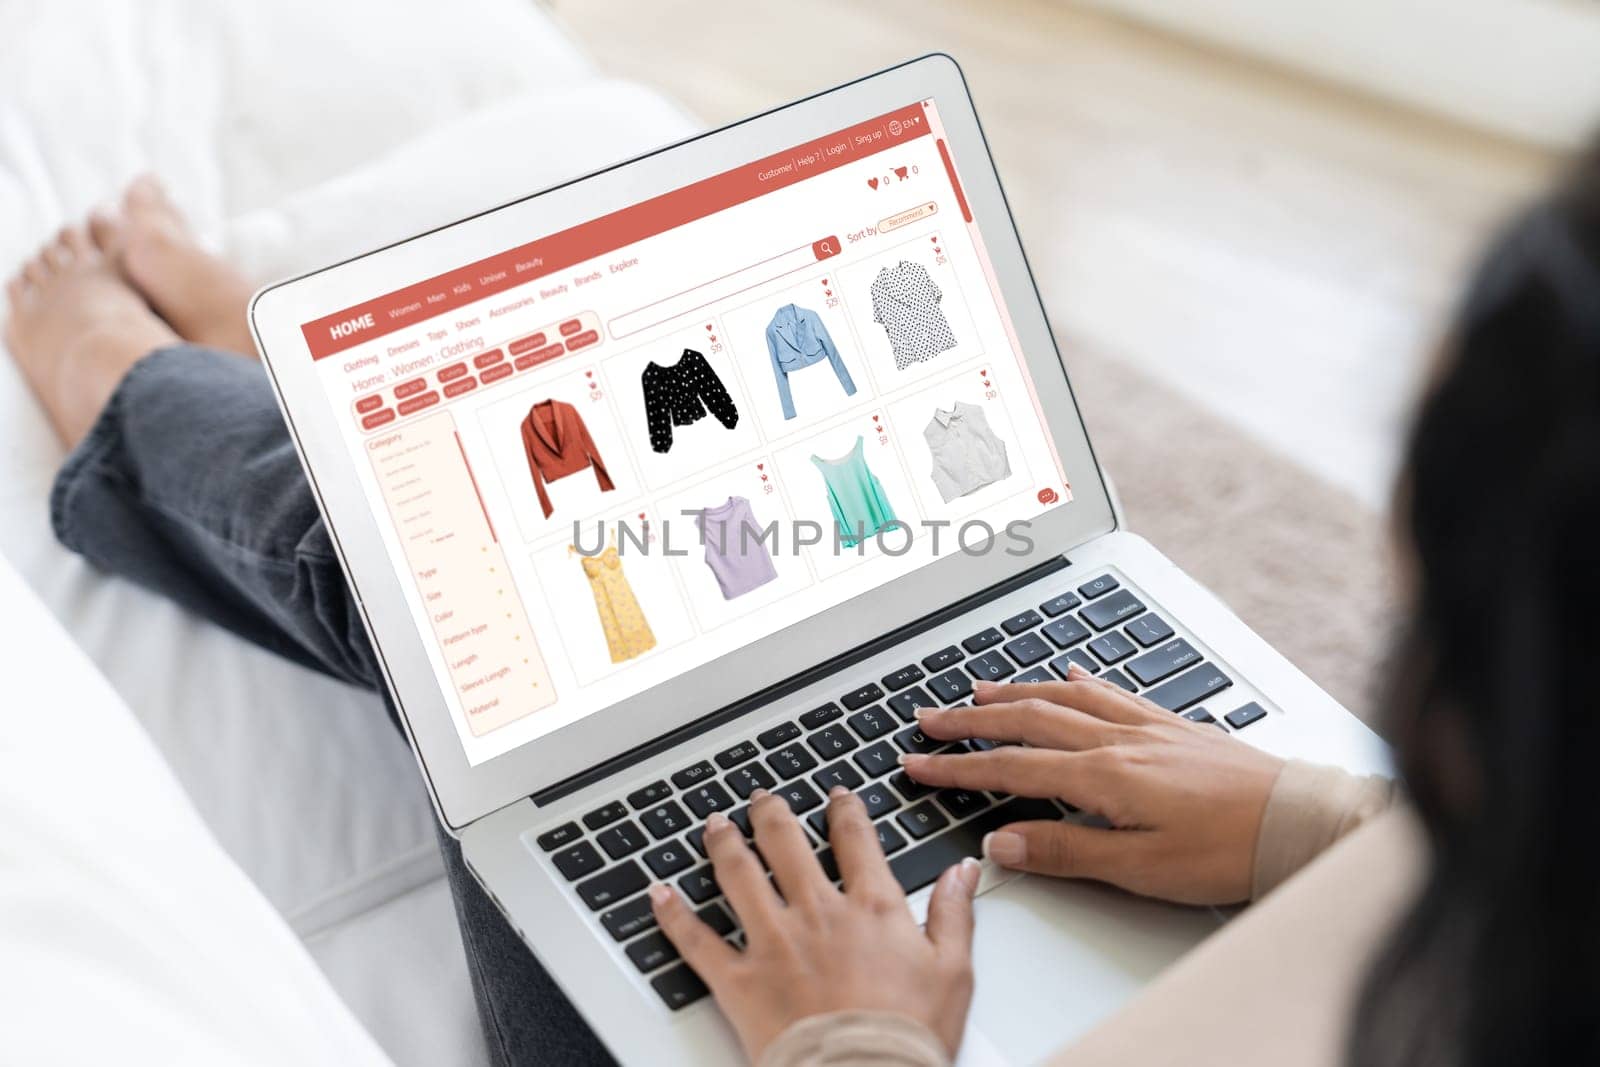 Woman shopping online on internet marketplace browsing for crucial sale items by biancoblue